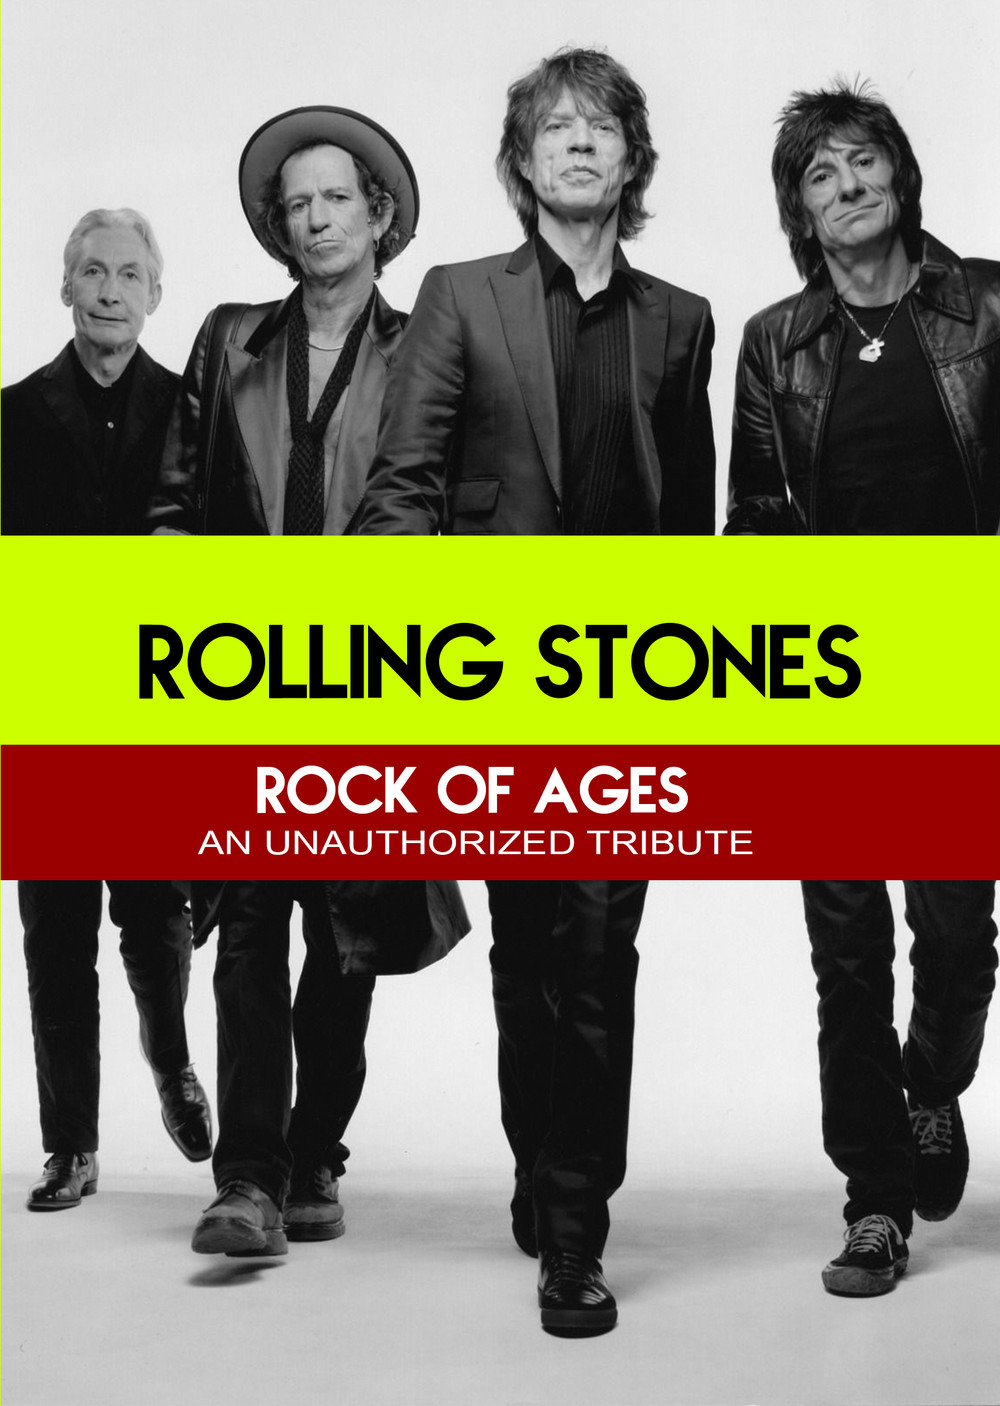 L7810 - The Rolling Stones Rock of Ages - An unauthorized Story